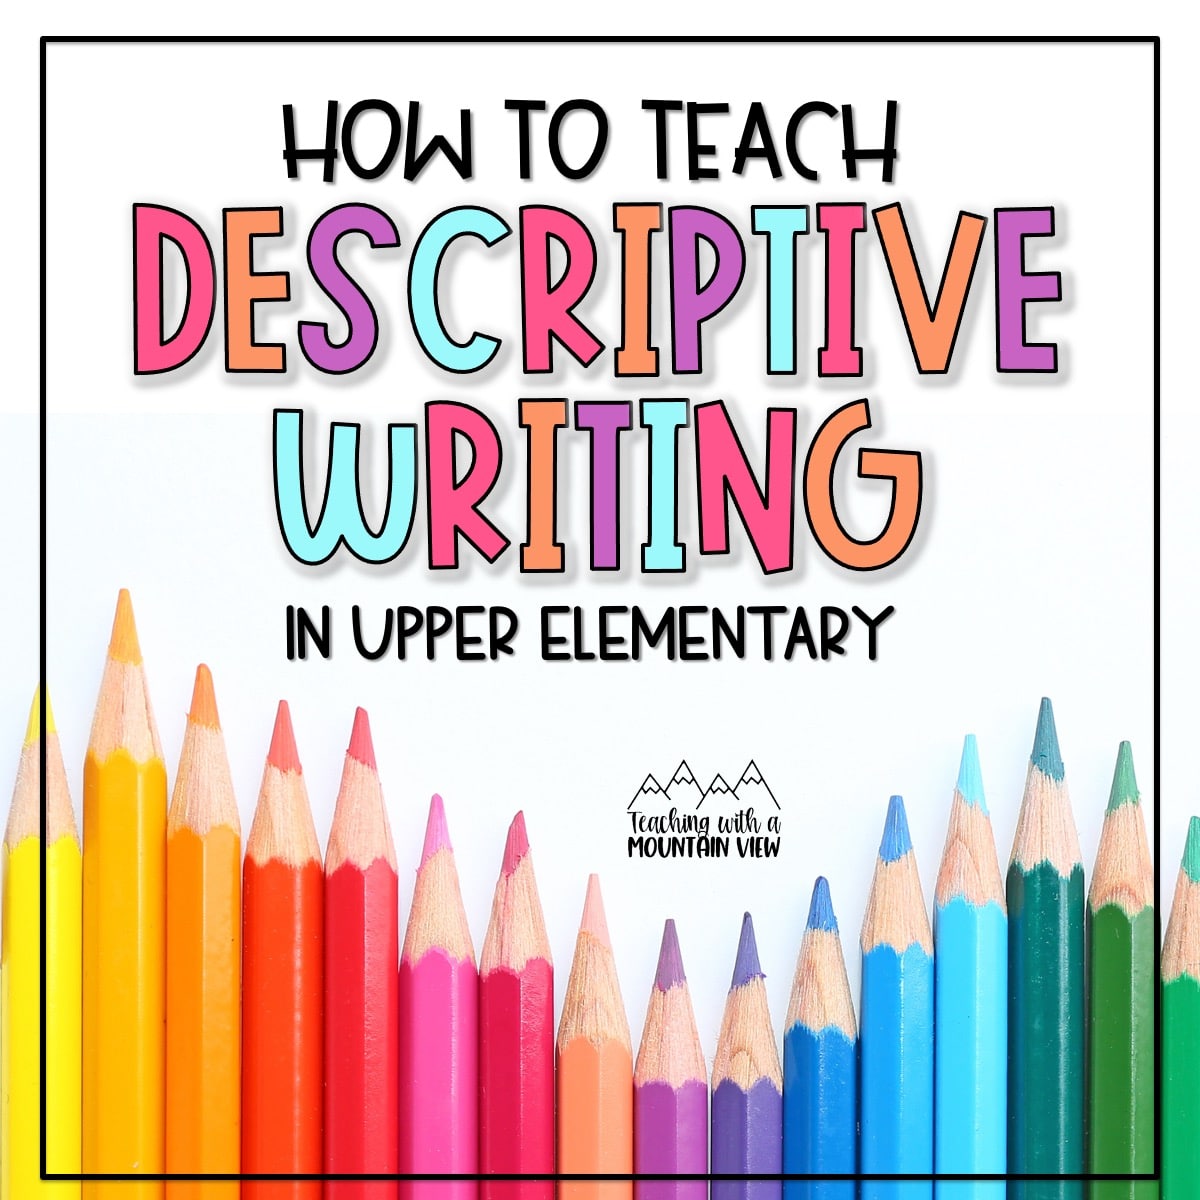 Upper elementary descriptive writing activities. Includes anchor charts for expanding sentences and descriptive writing prompts.